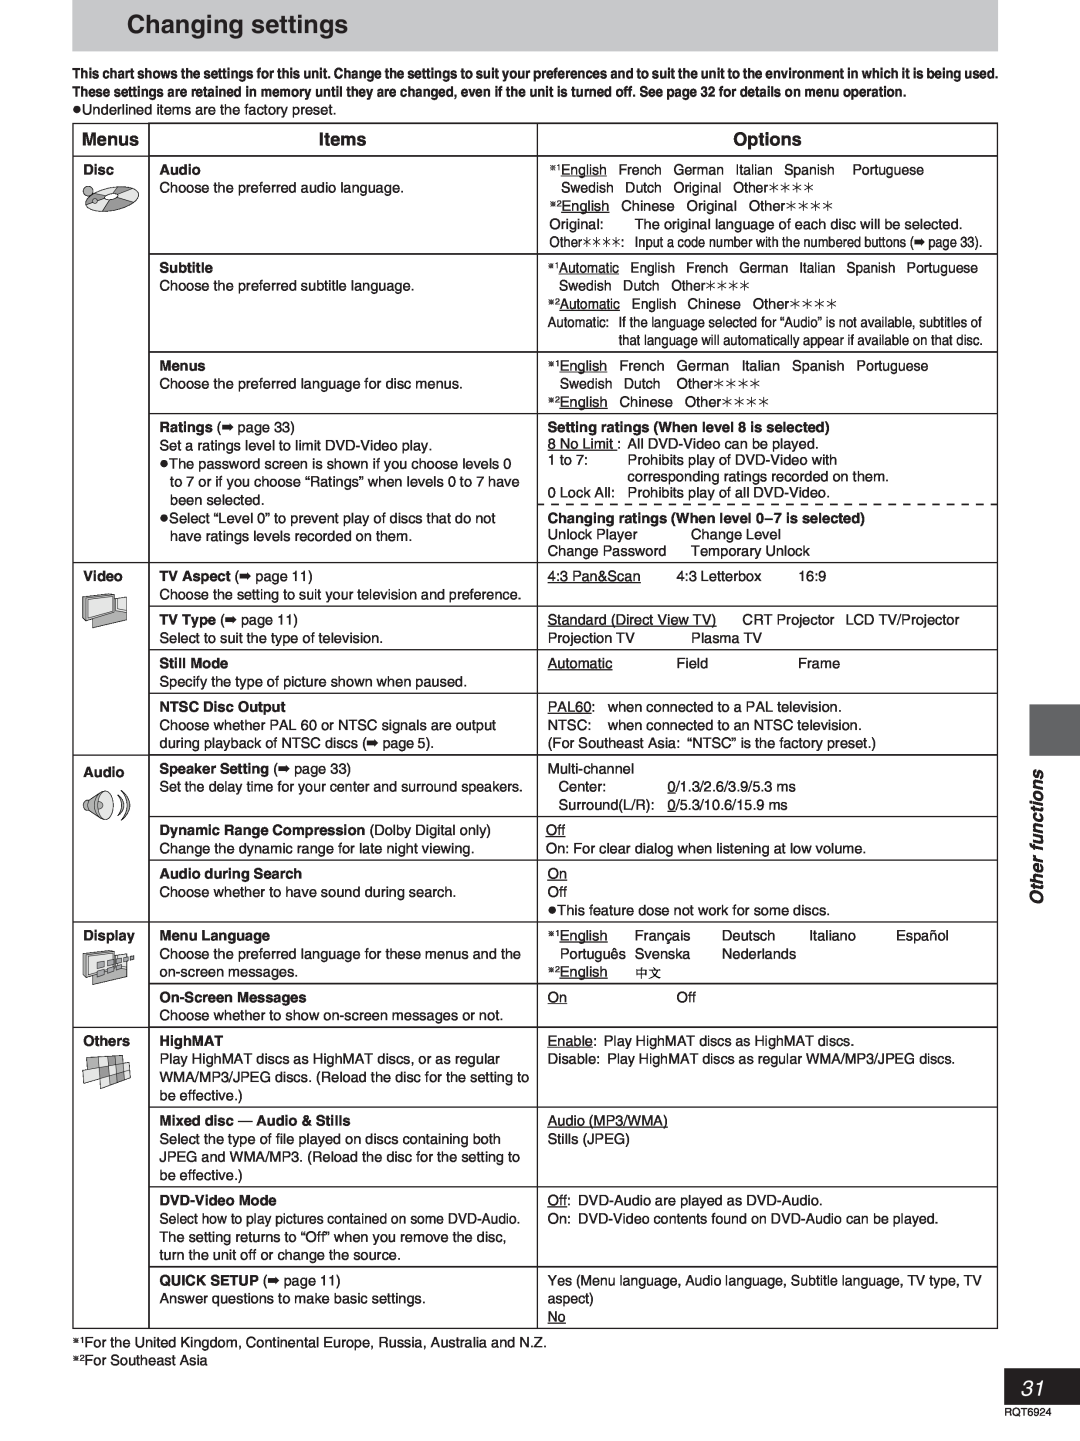 Panasonic SC-DT310 manual Changing settings, Other functions 